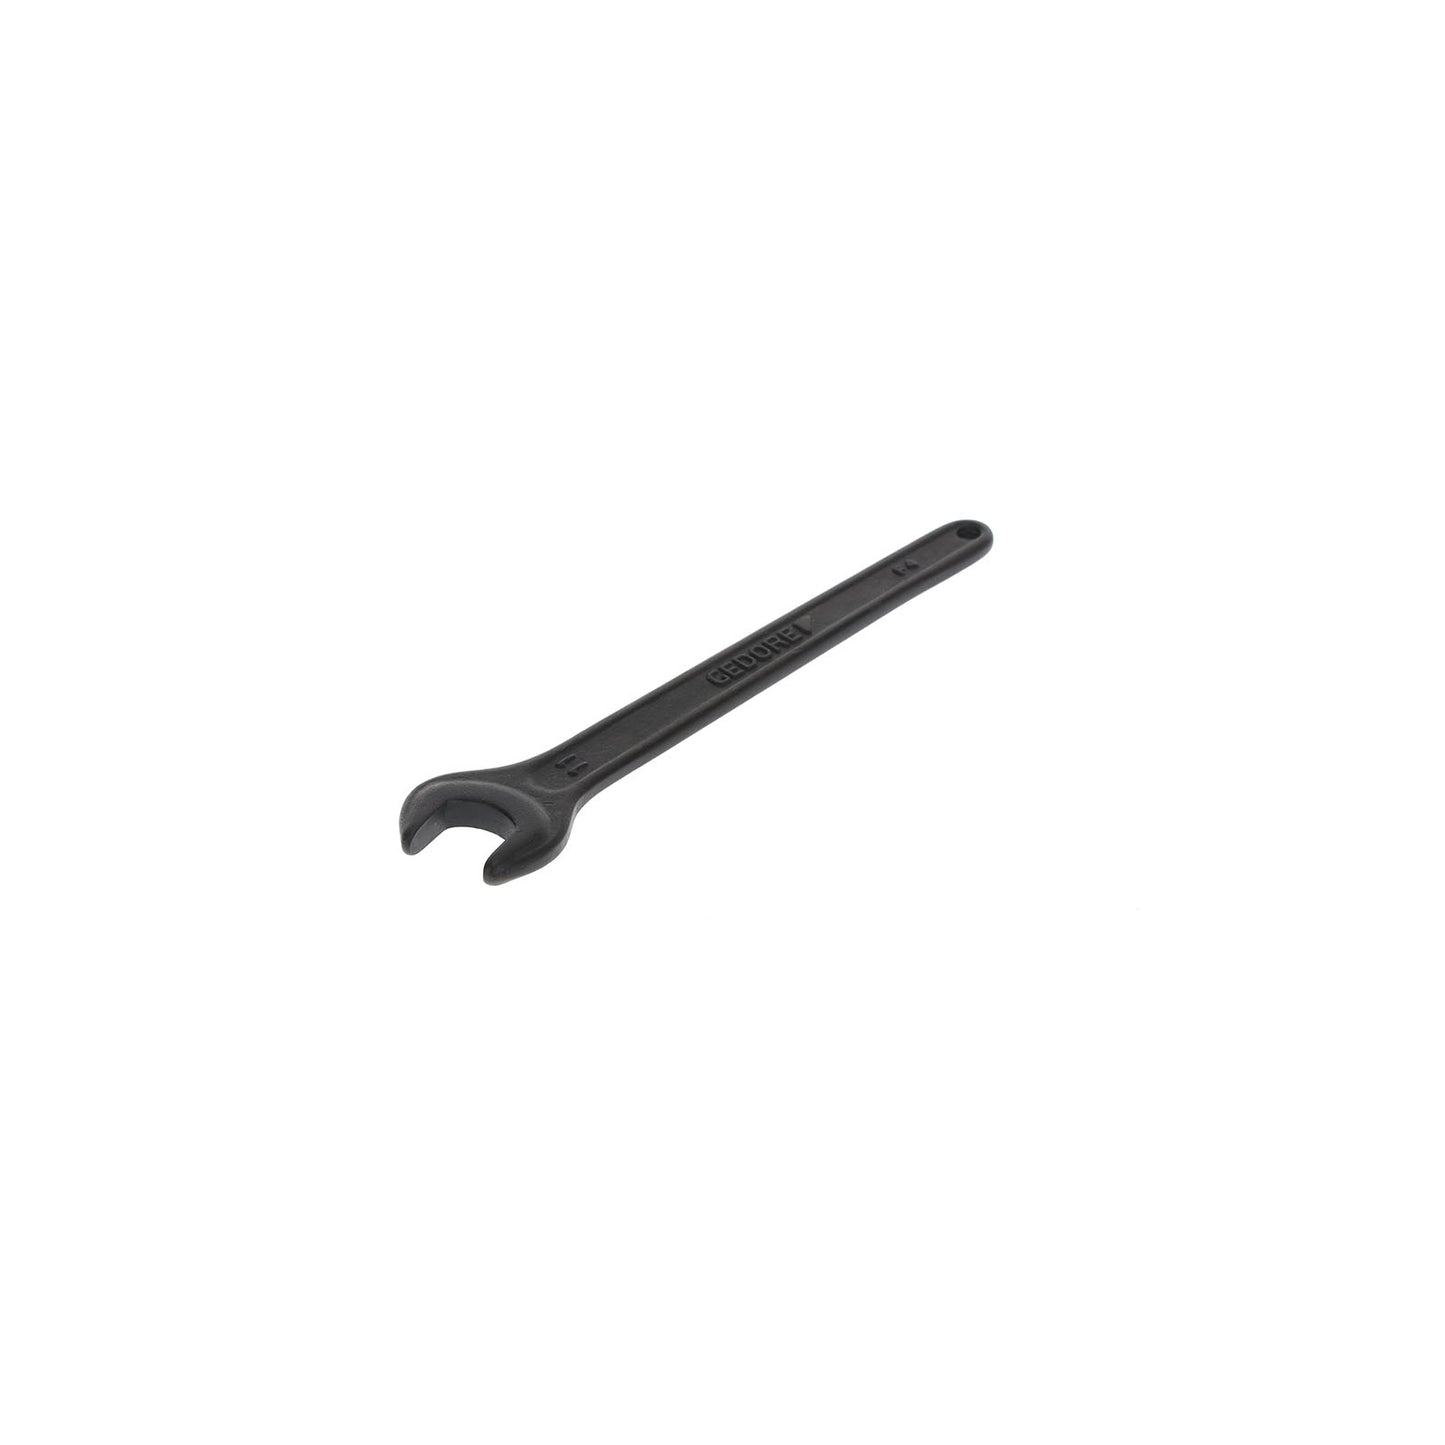 GEDORE 894 11 - 1 Open End Wrench, 11mm (6574170)